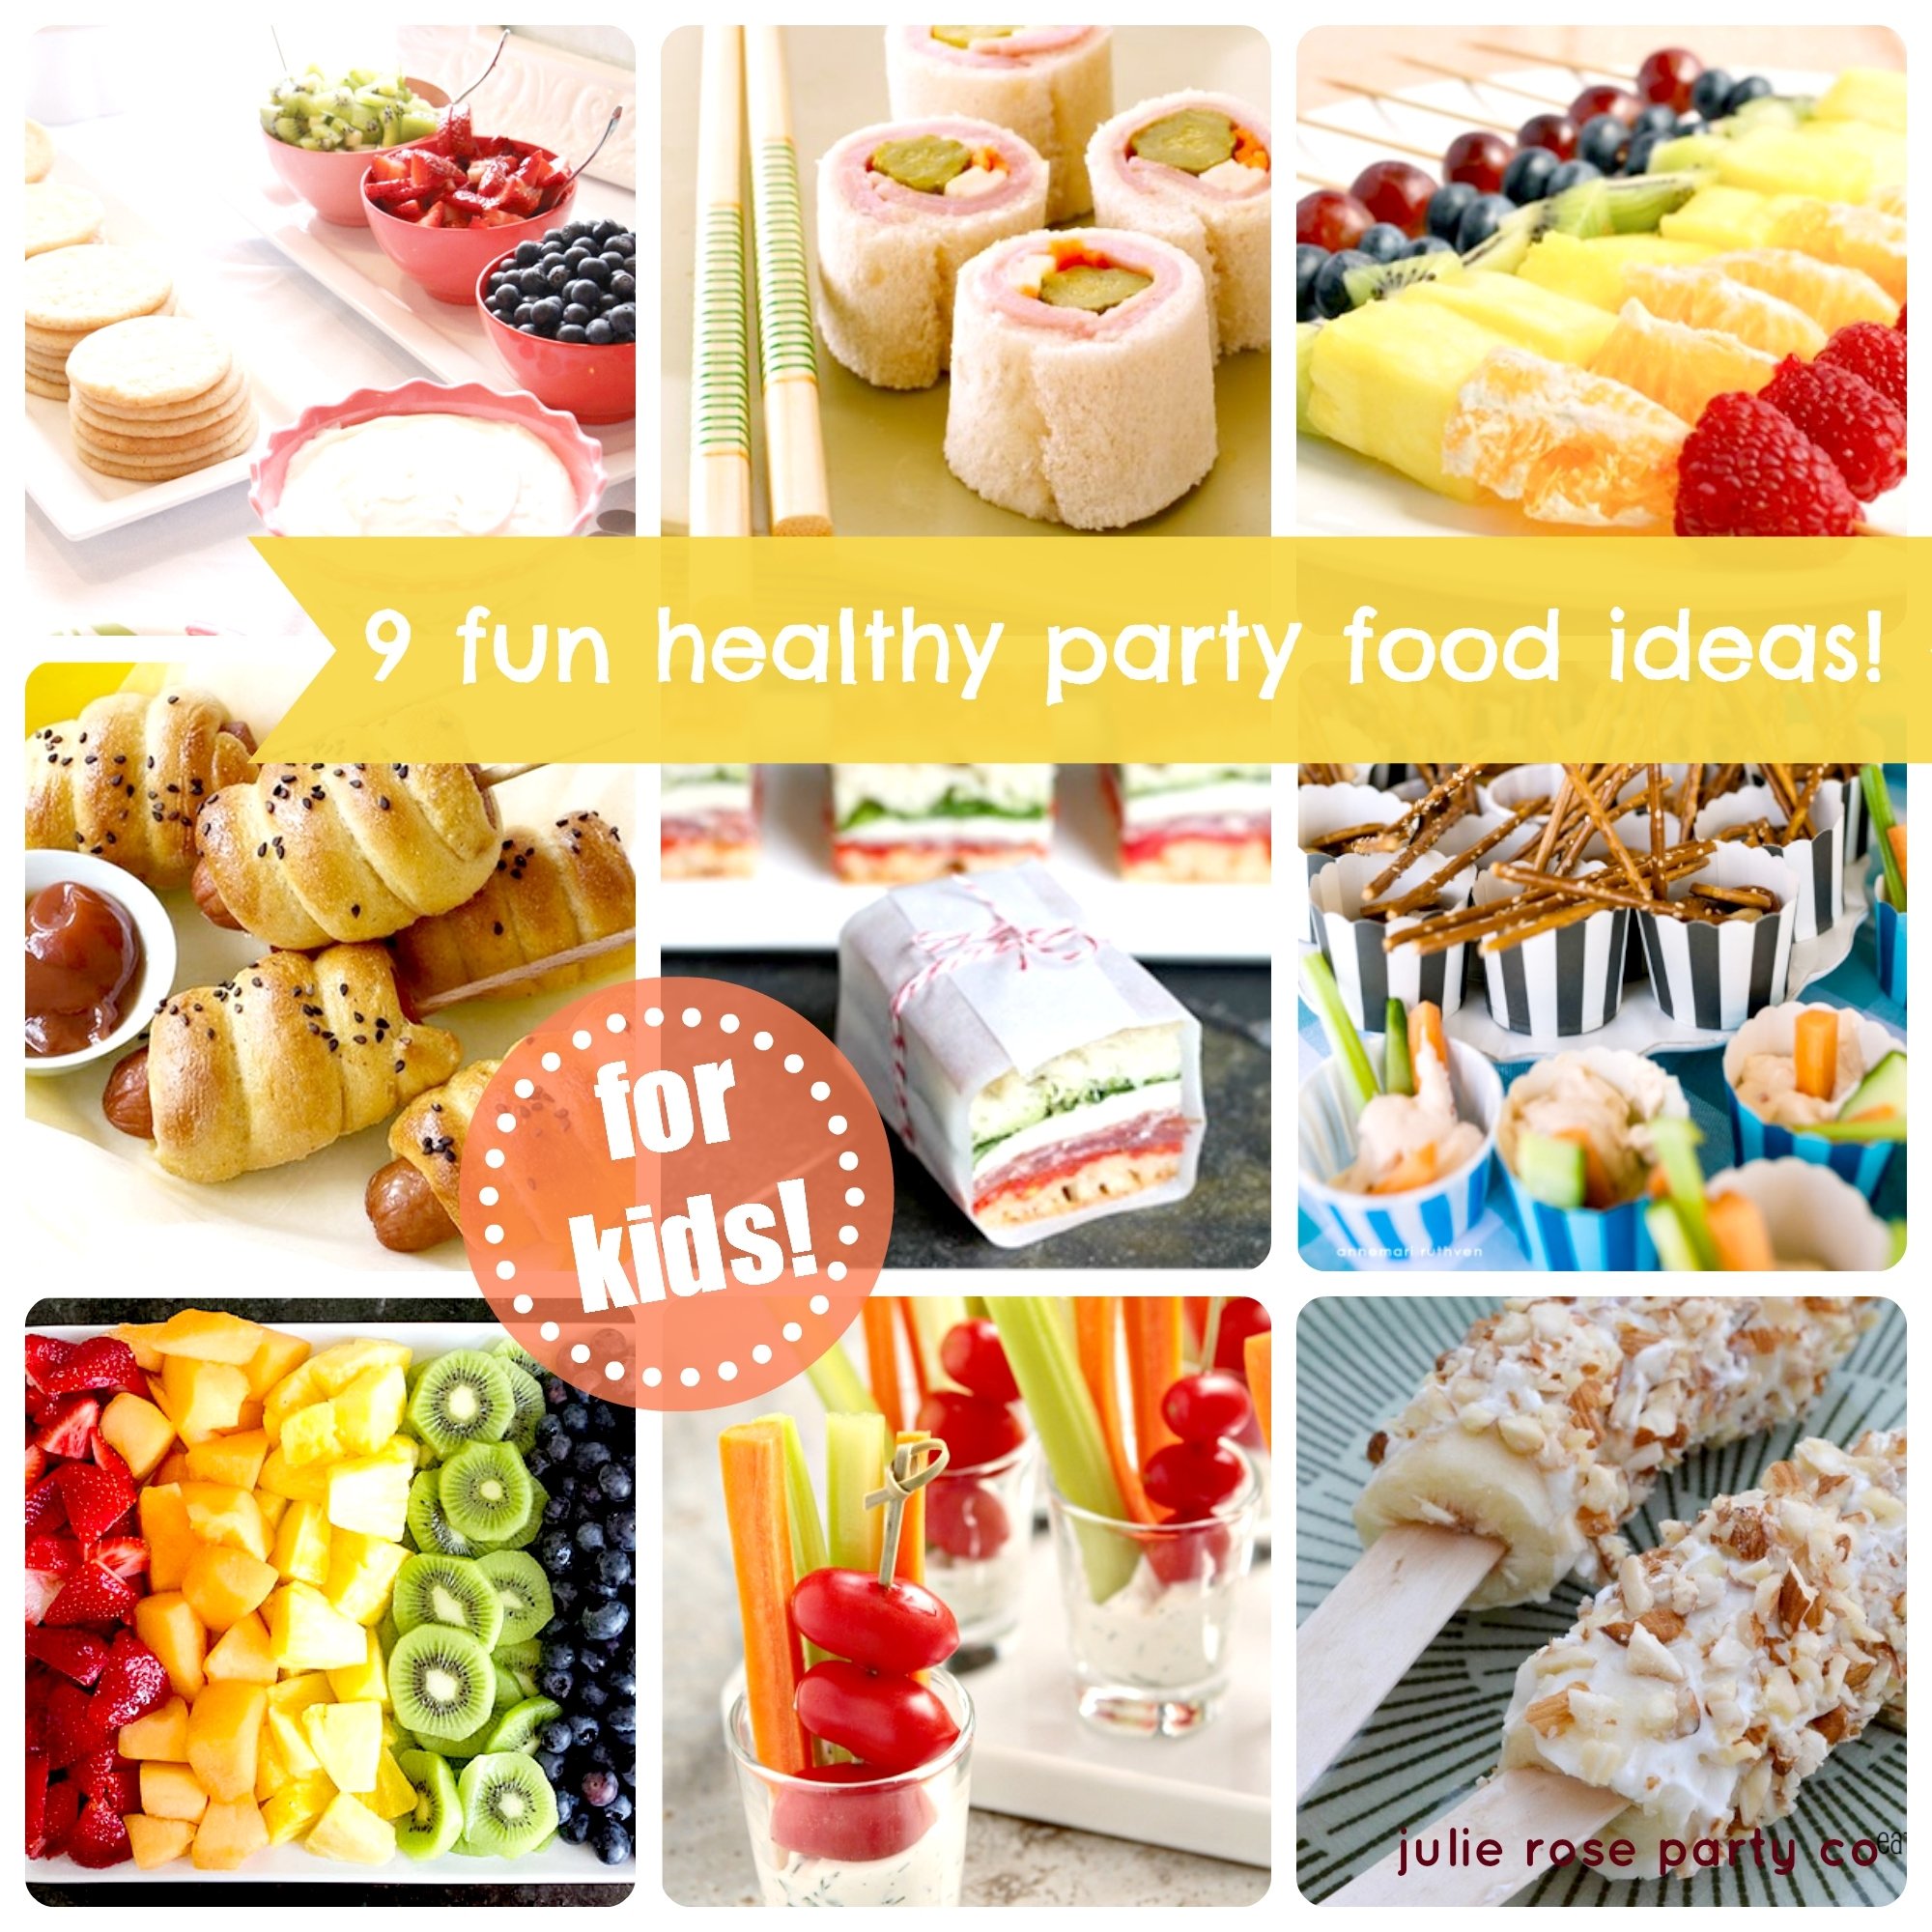 10 Great Snack Ideas For Kids Party 9 fun and healthy party food ideas kids julie rose party co 1 2023